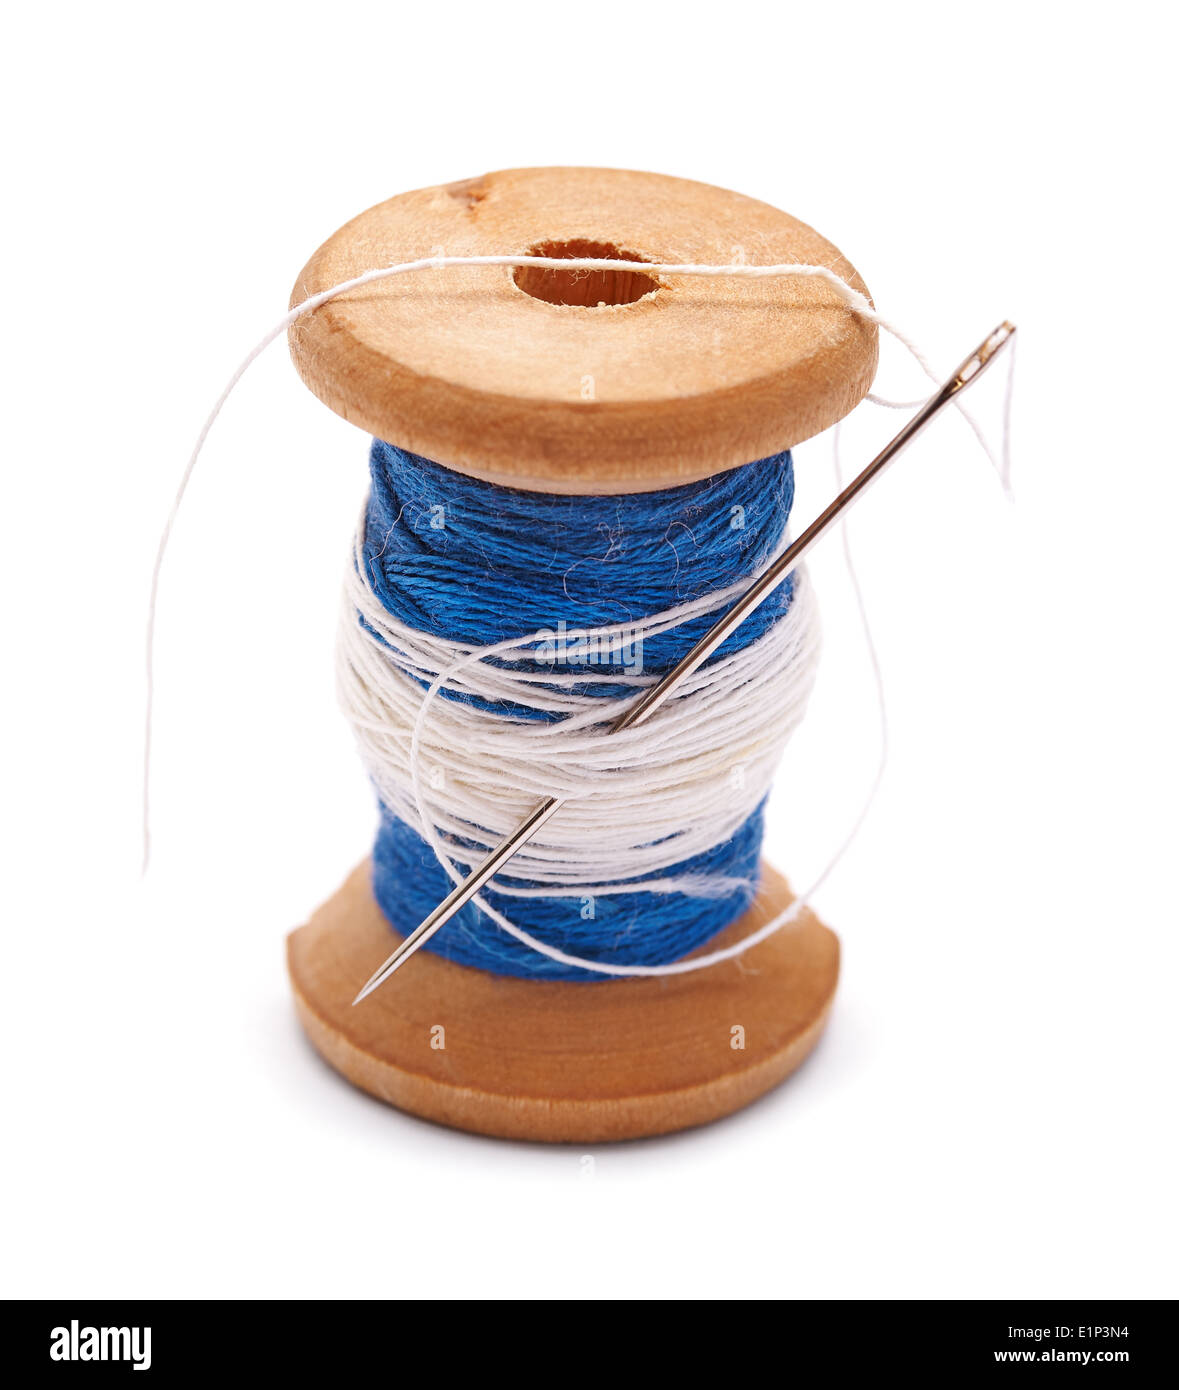 spool of thread on a white background Stock Photo